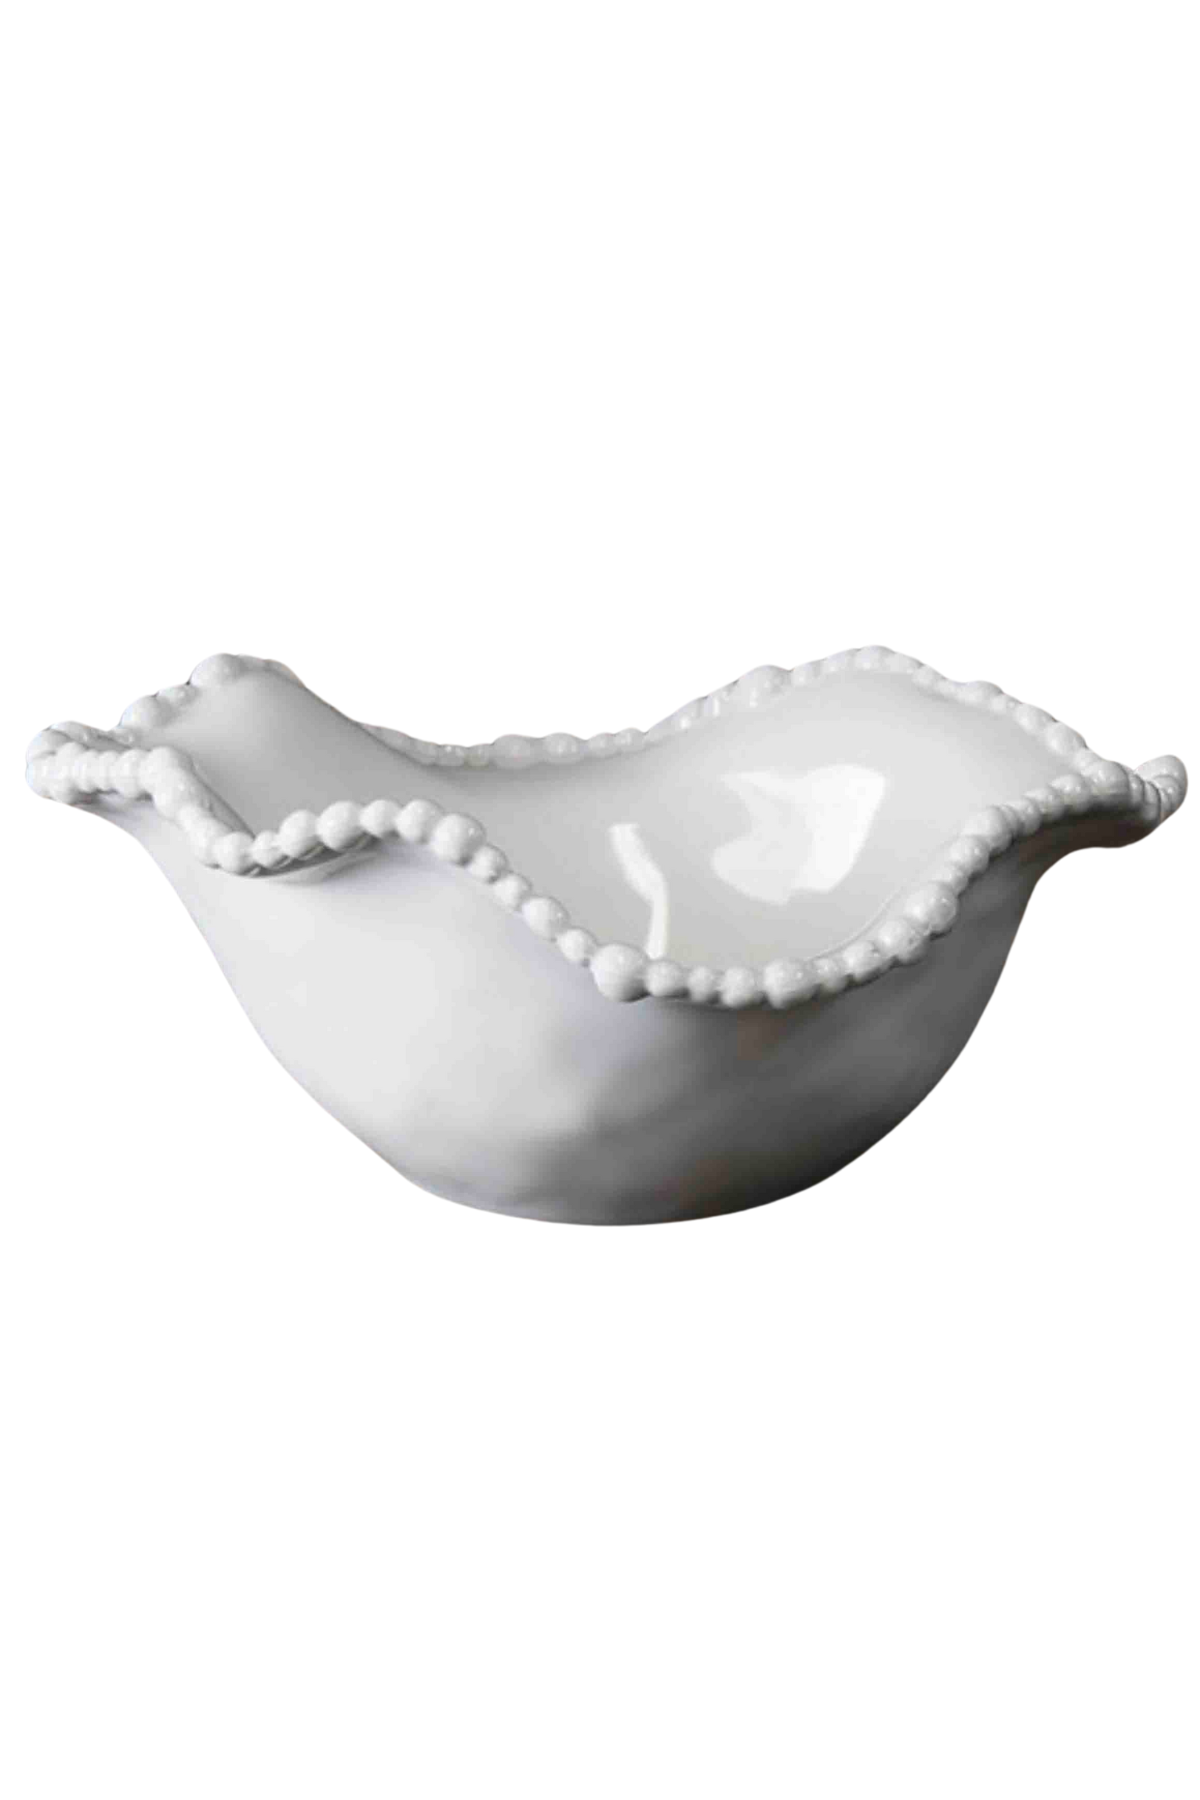 White Luxury VIDA Alegria Small Sauce Bowl by Beatrix Ball with Pearl rimmed detail